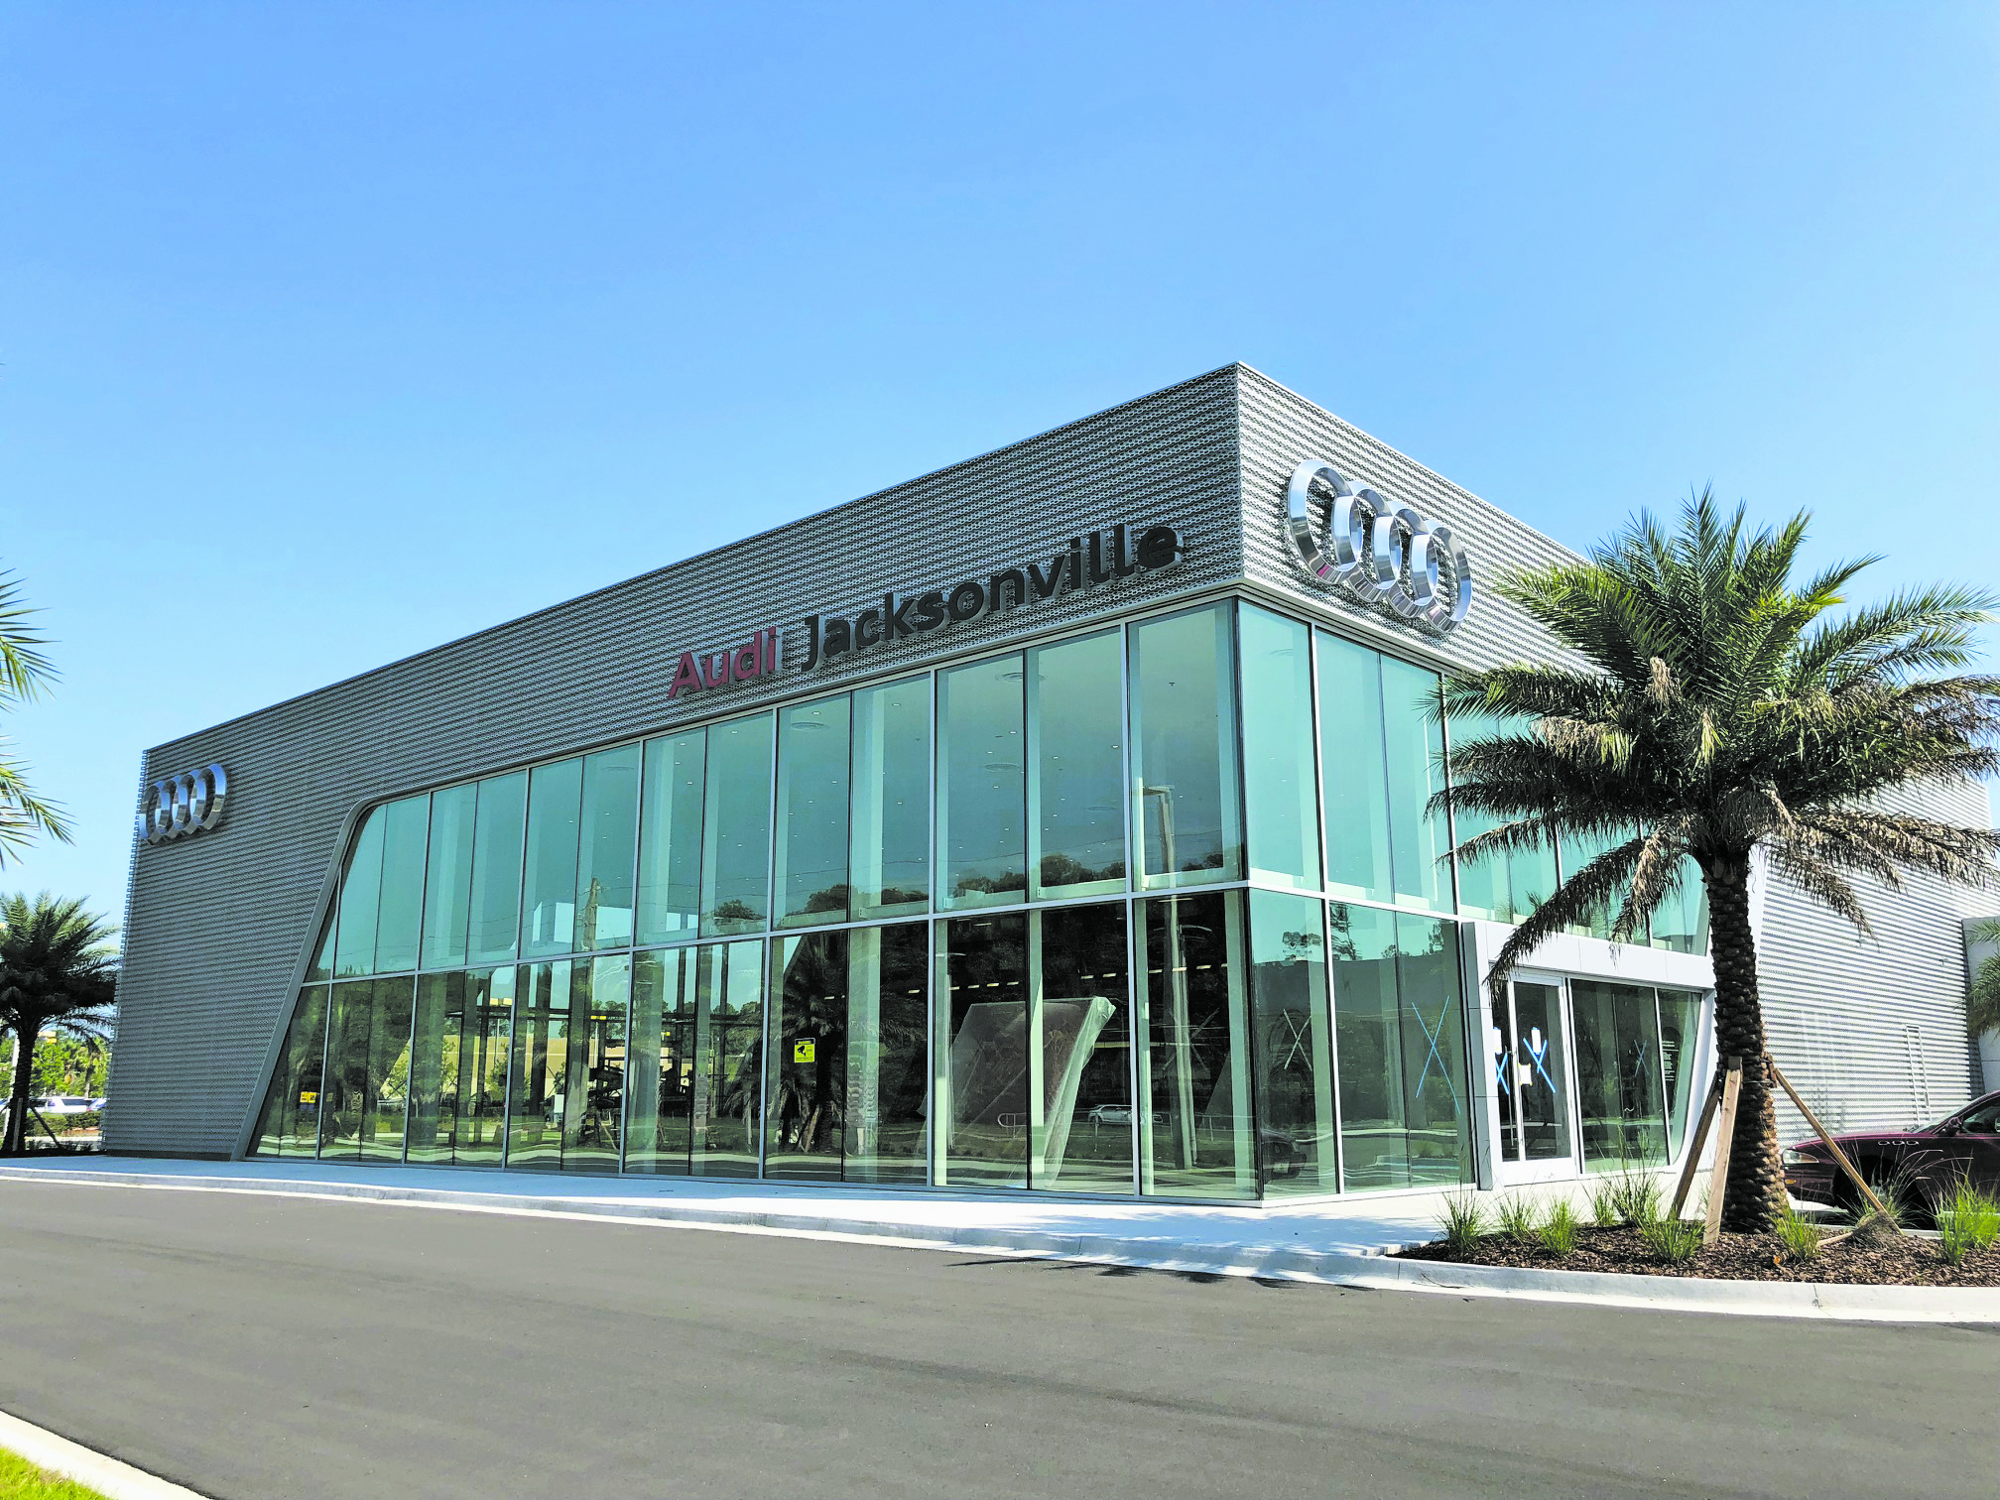 The $15 million Audi dealership at 11401 Atlantic. Blvd. is scheduled to open Monday. It features a 10-car showroom and an open floor plan.